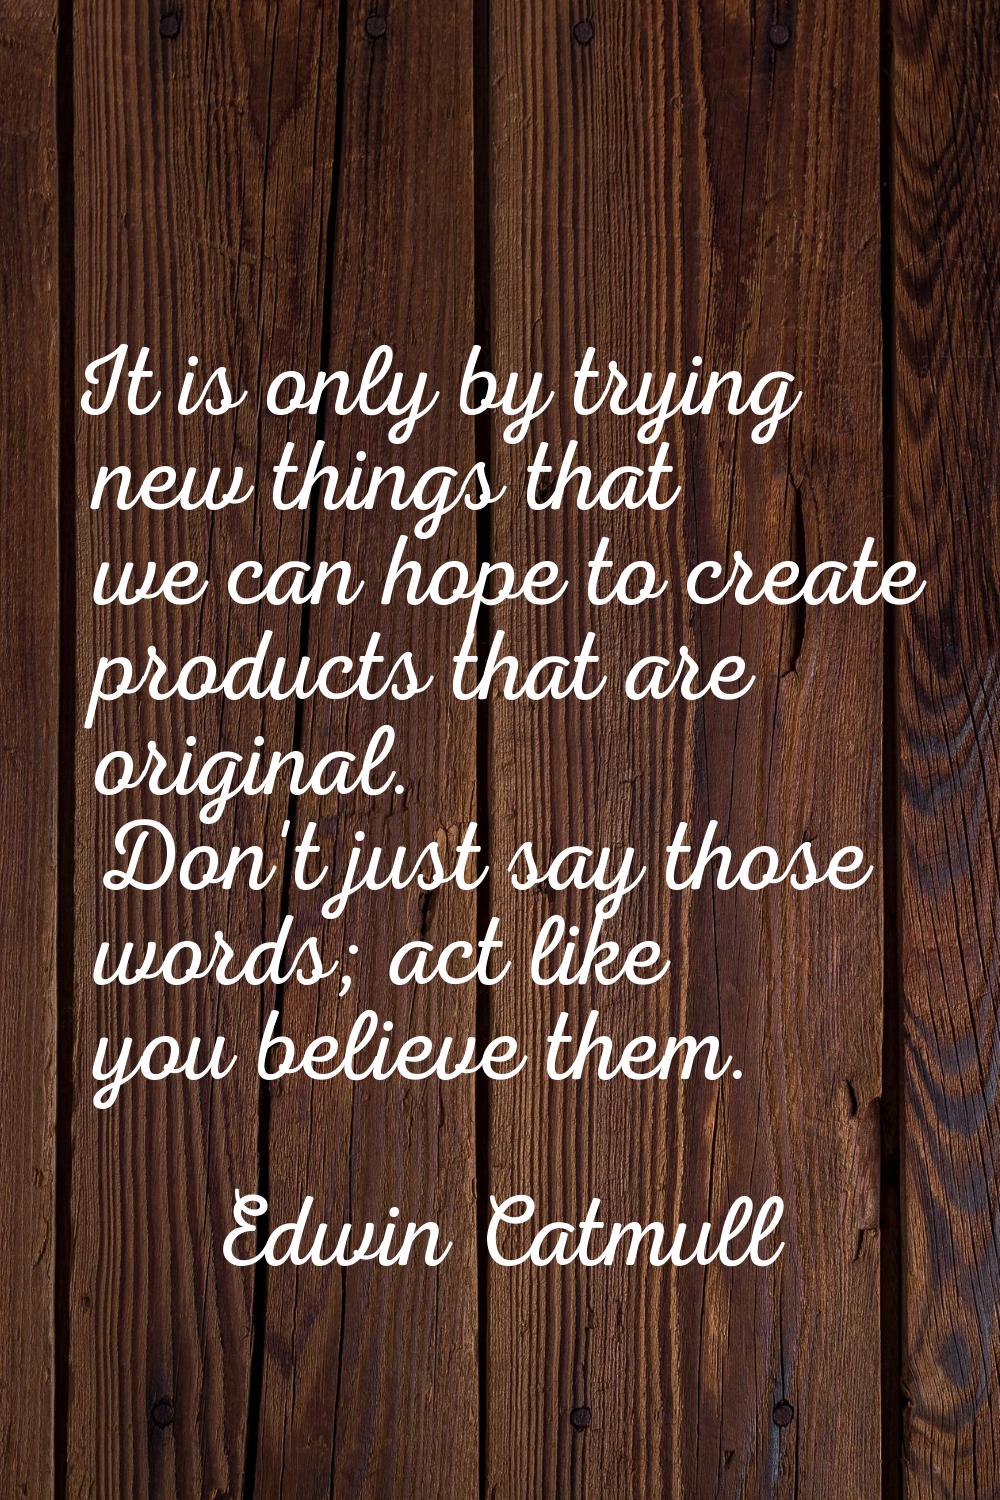 It is only by trying new things that we can hope to create products that are original. Don't just s